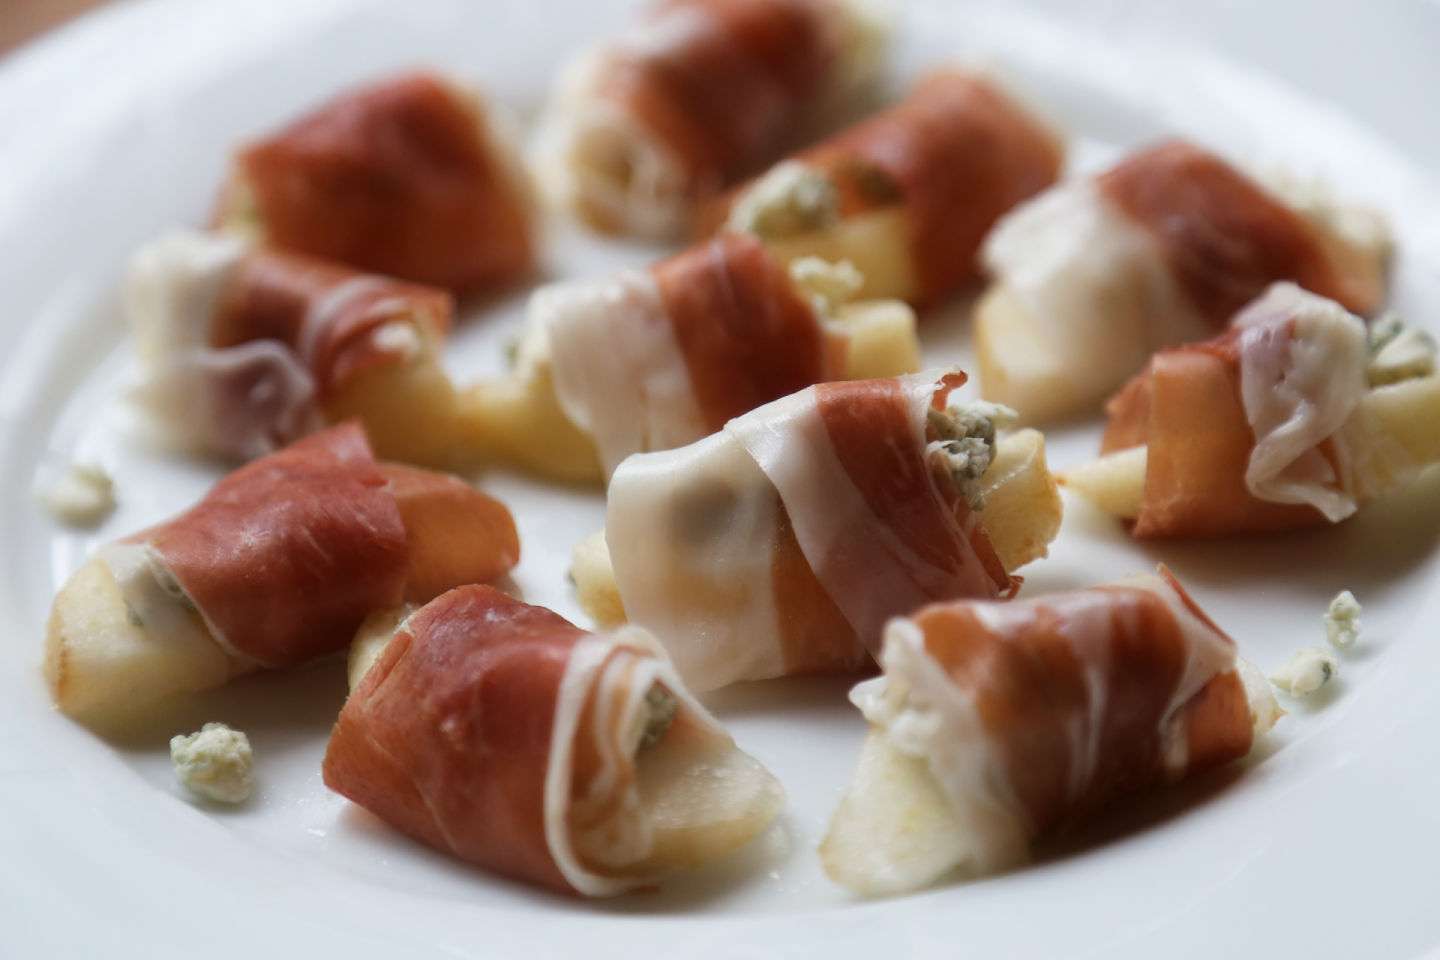 Prosciutto-Wrapped Pears with Gorgonzola Wendy Goodfriend